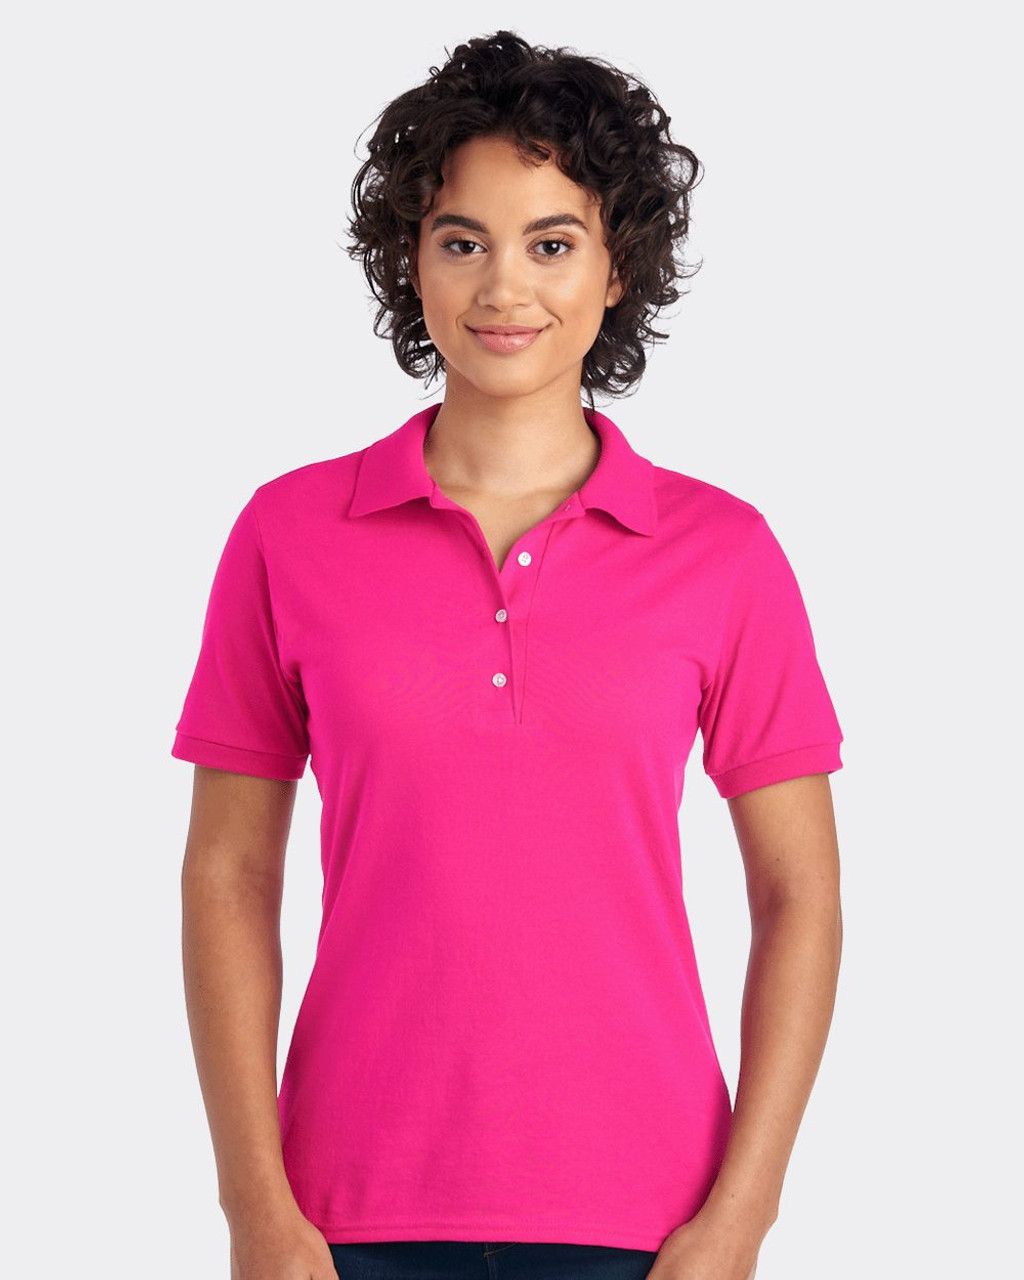 Embroidered Women's Spotshield™ 50/50 Polo - 437WR